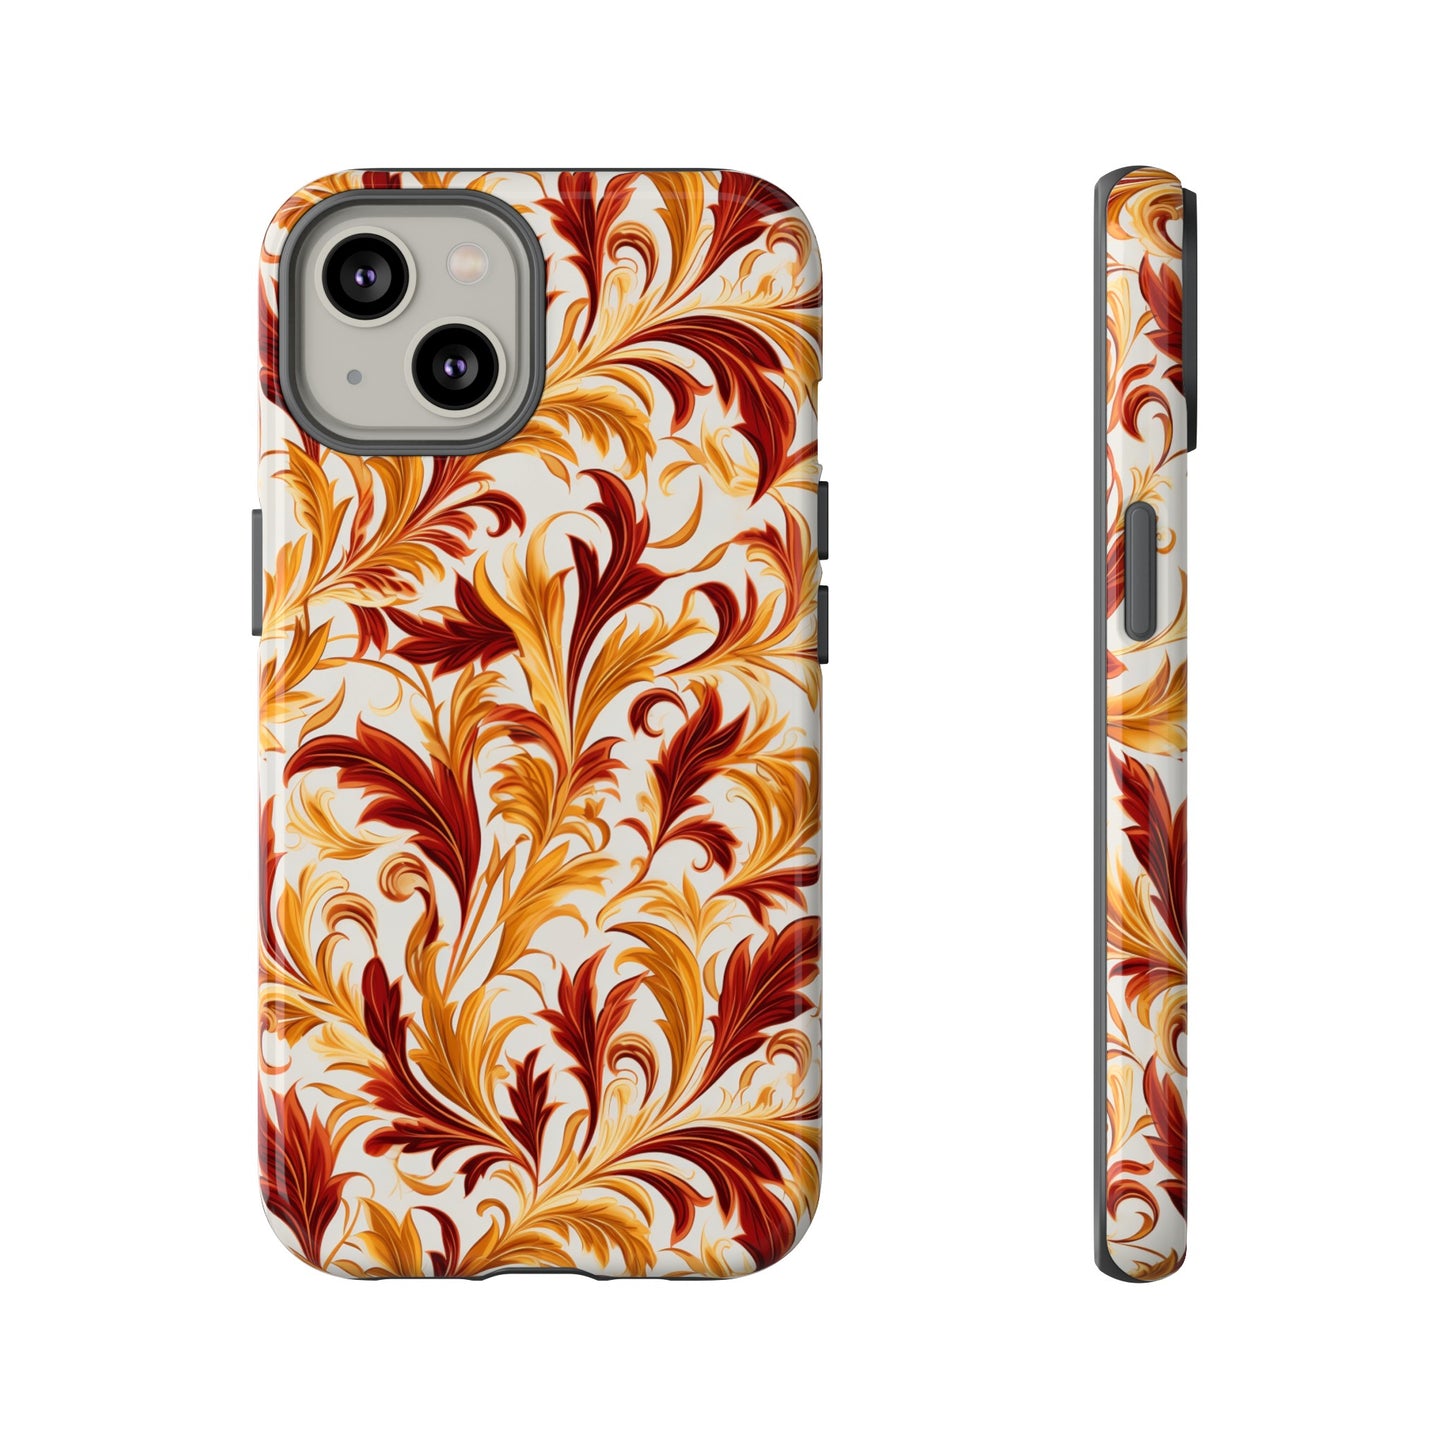 Swirling Autumn: Vortexes of Fall Foliage in Gold and Bronze - Tough Phone Case